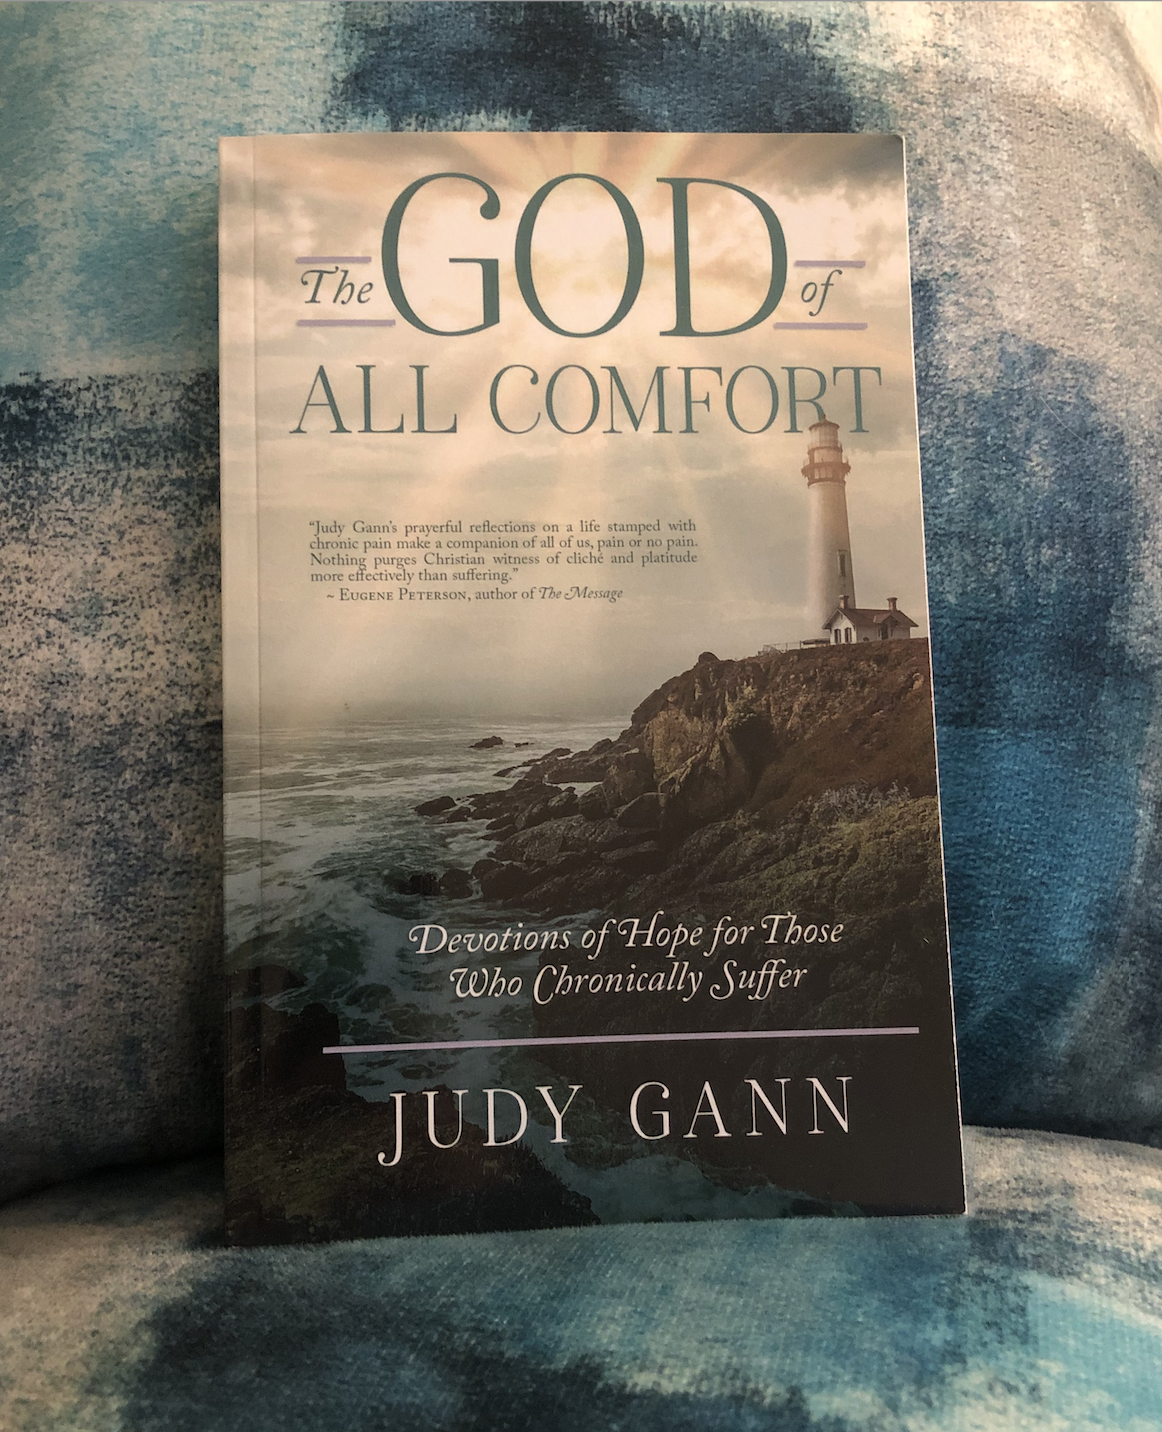 book "The God of All Comfort" by Judy Gann on a teal and gray background